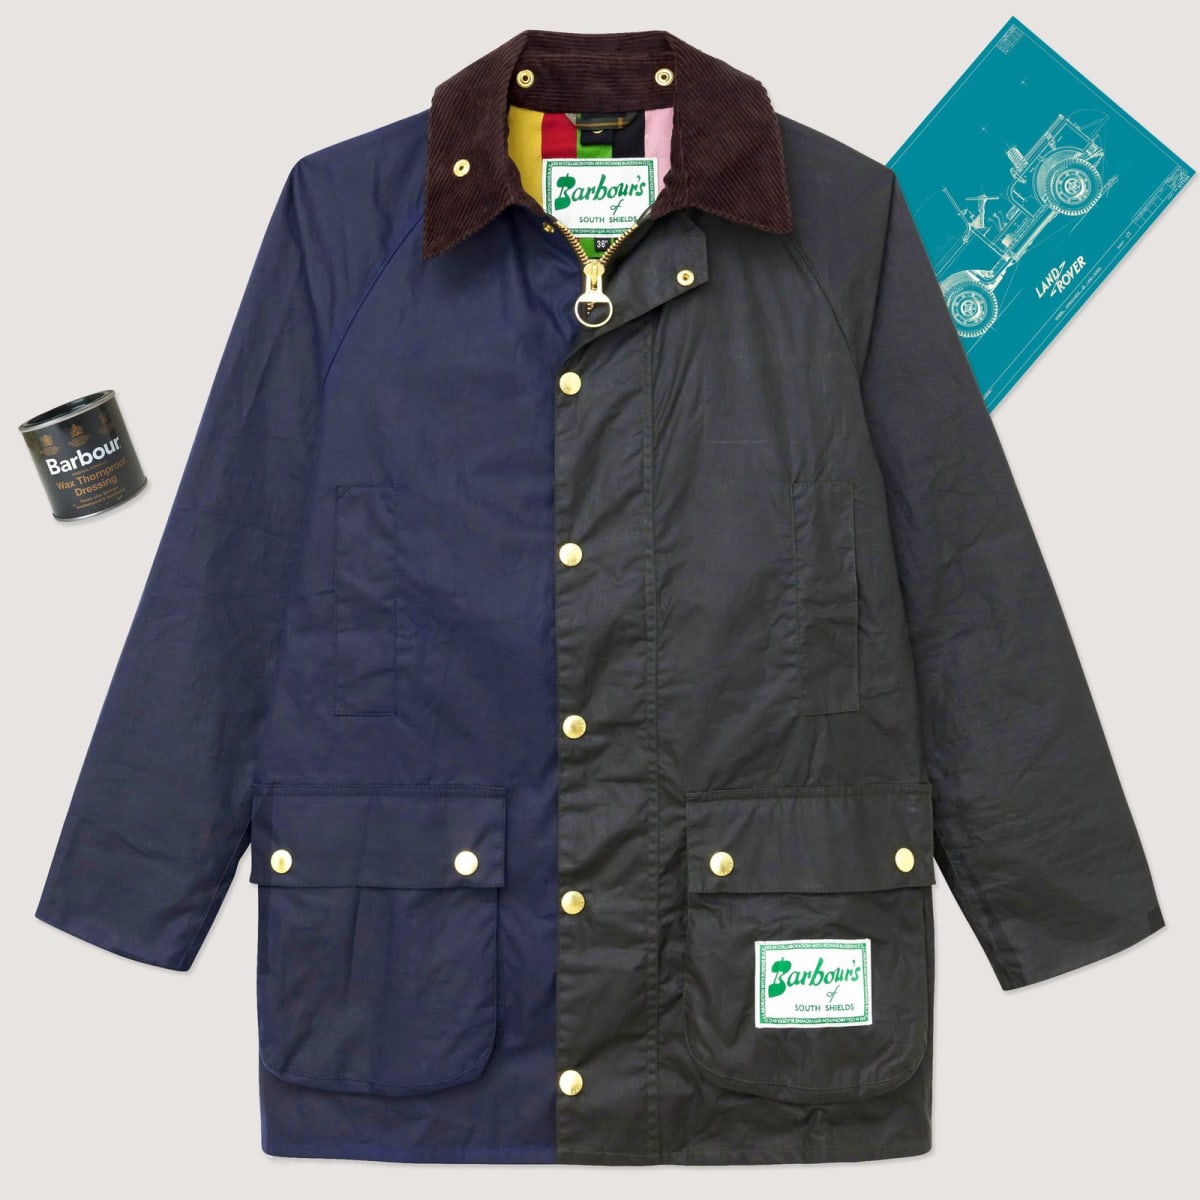 Rowing Blazers and Barbour give the Beaufort jacket a two-tone 